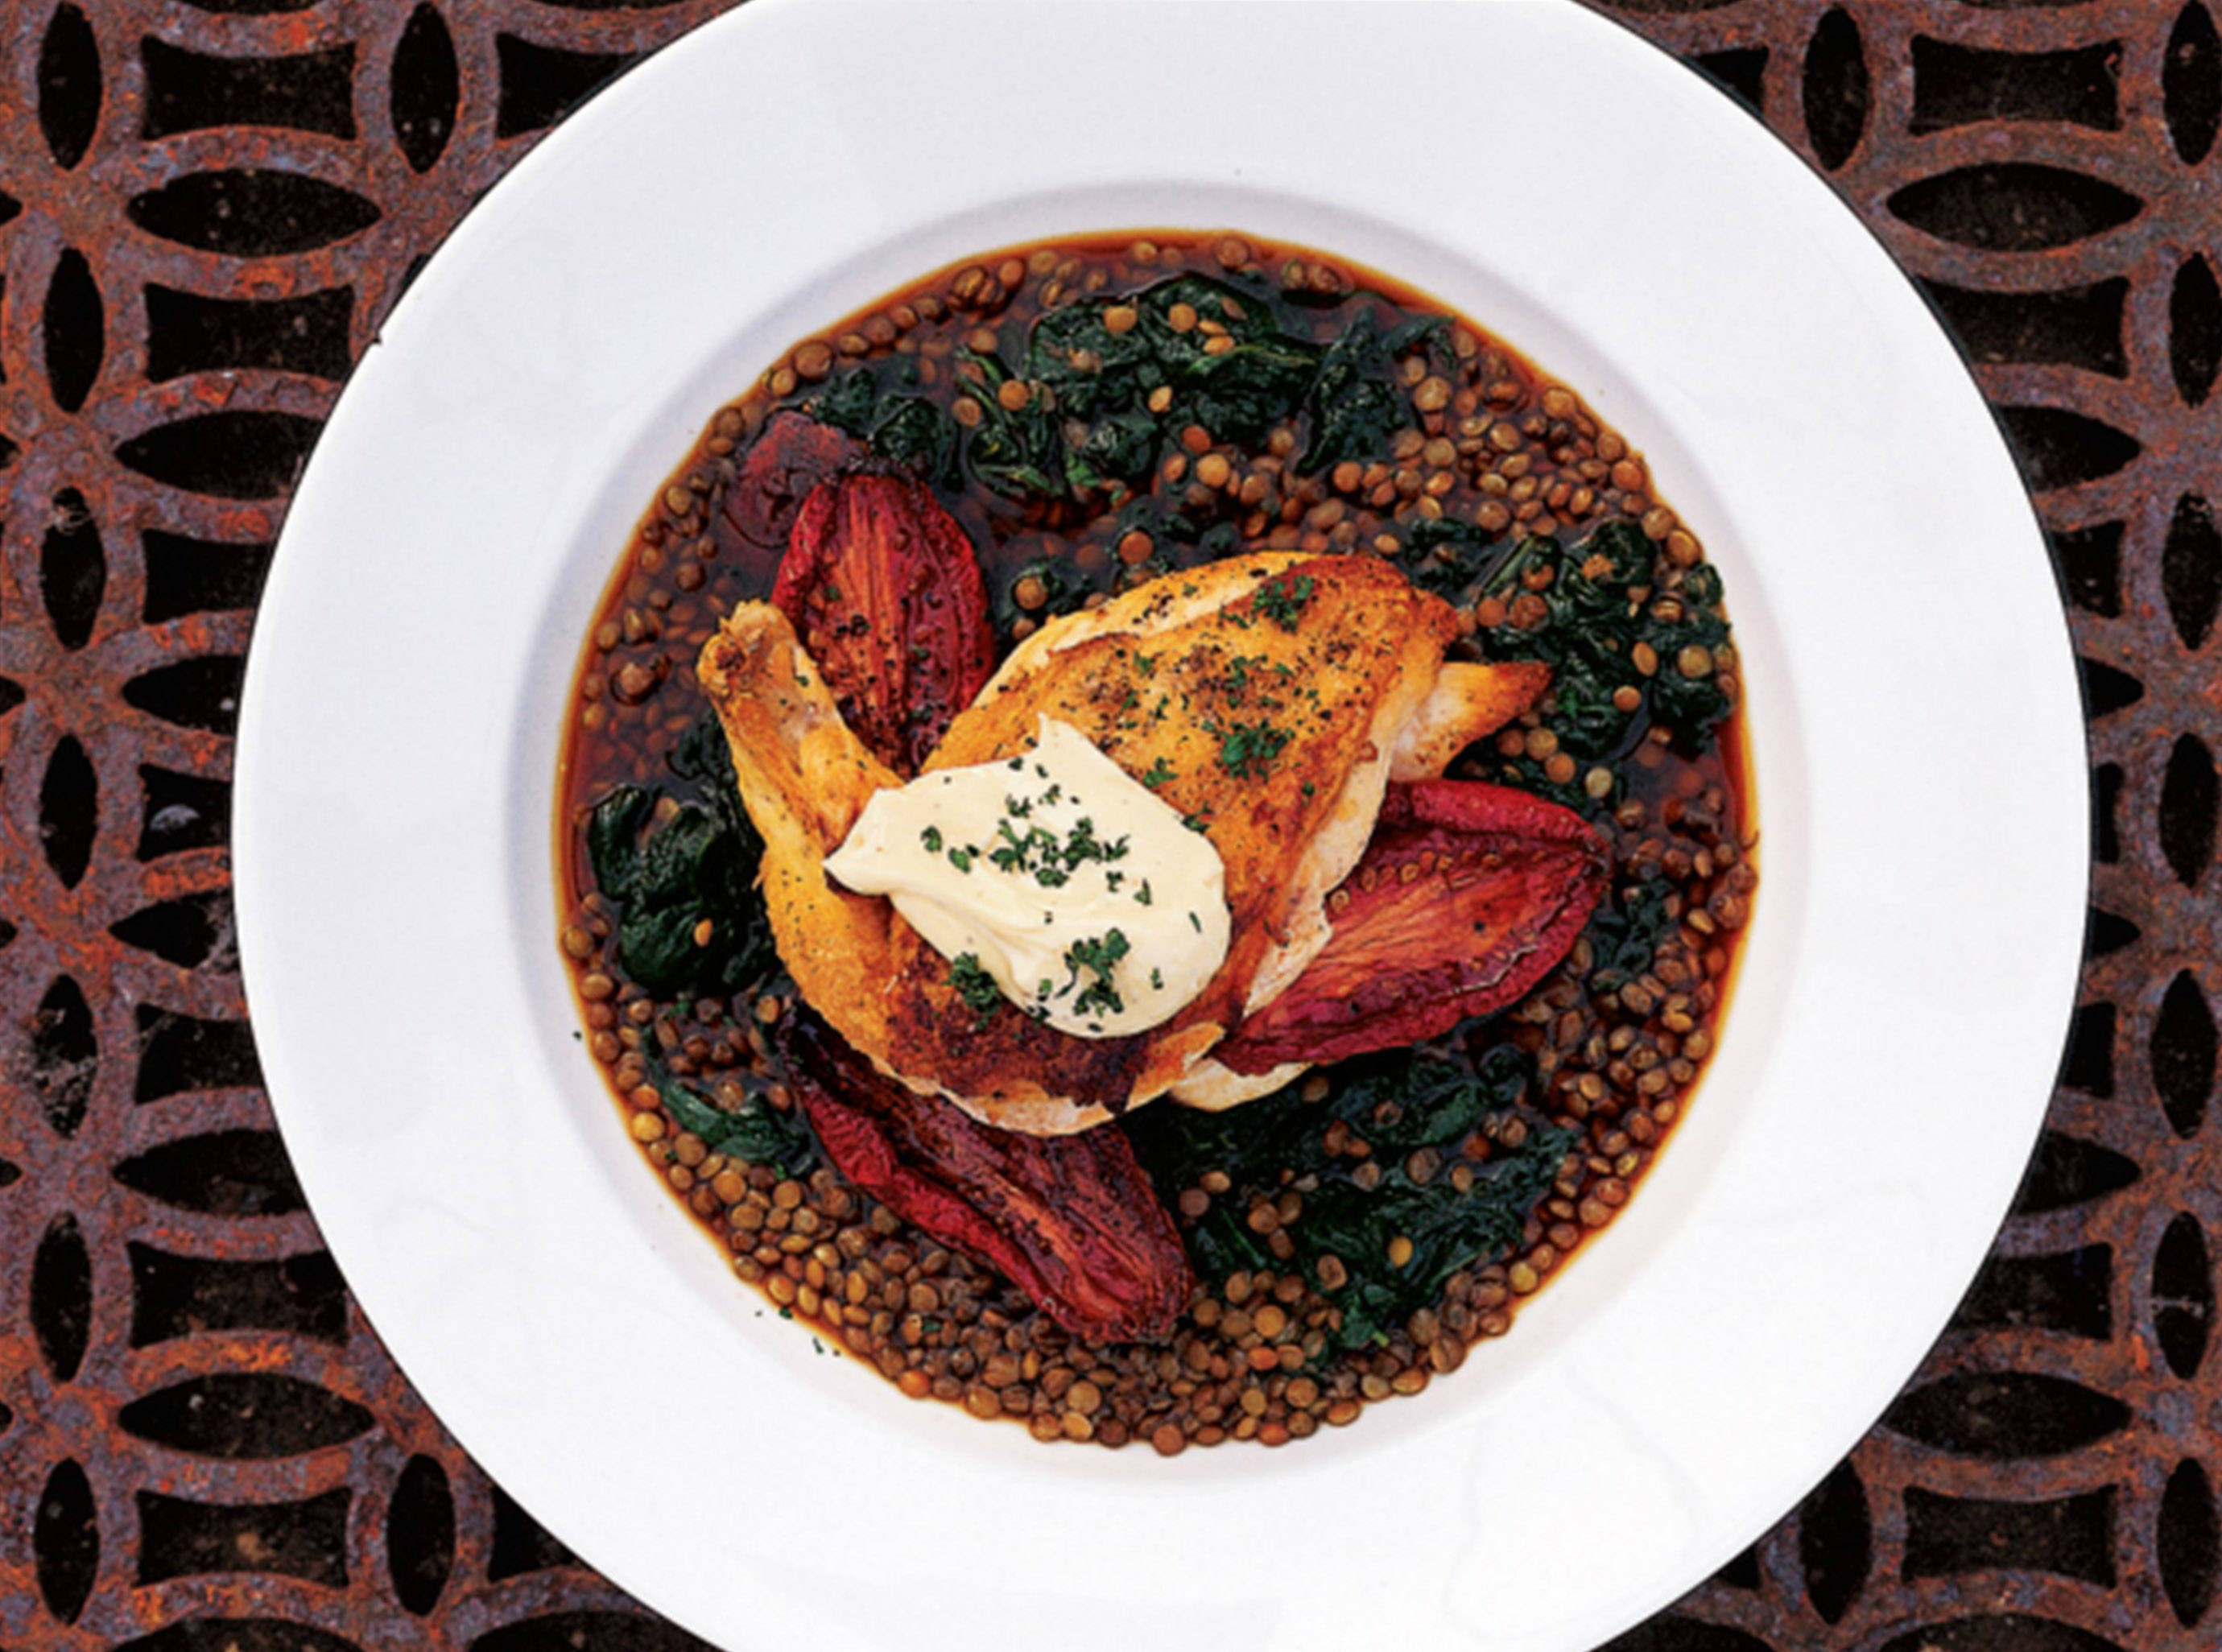 Pan-roasted chicken with lentils, roasted tomatoes and basil oil